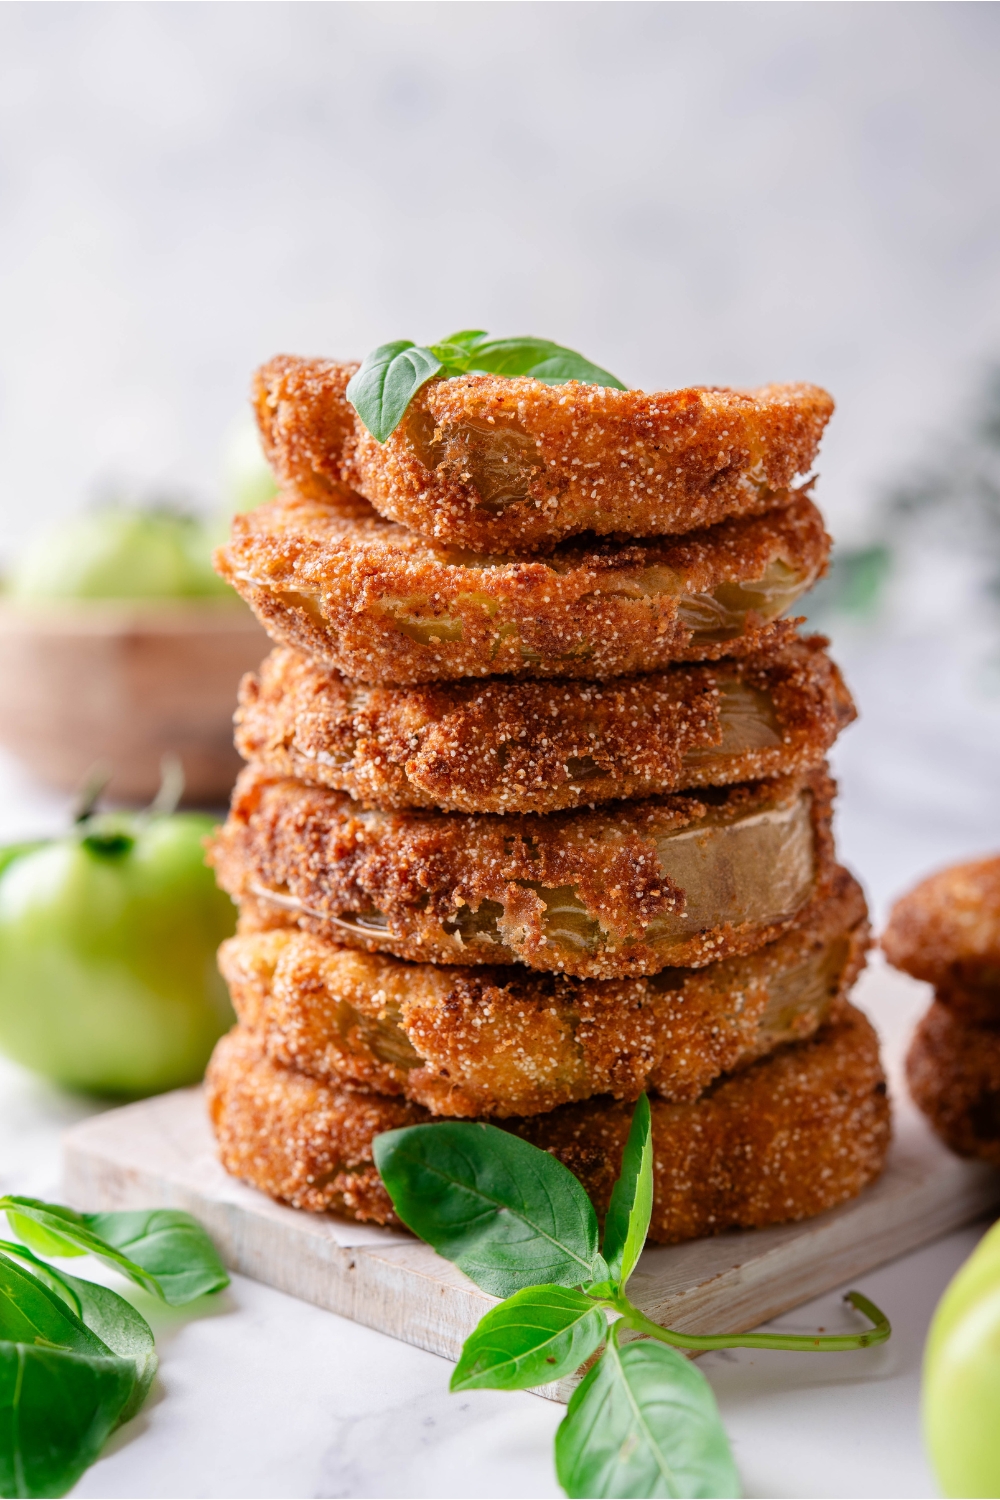 Six breaded and fried green tomatoes stacked evenly on top of each other with a garnish of green herbs on top and fresh green tomatoes surrounding the stack.